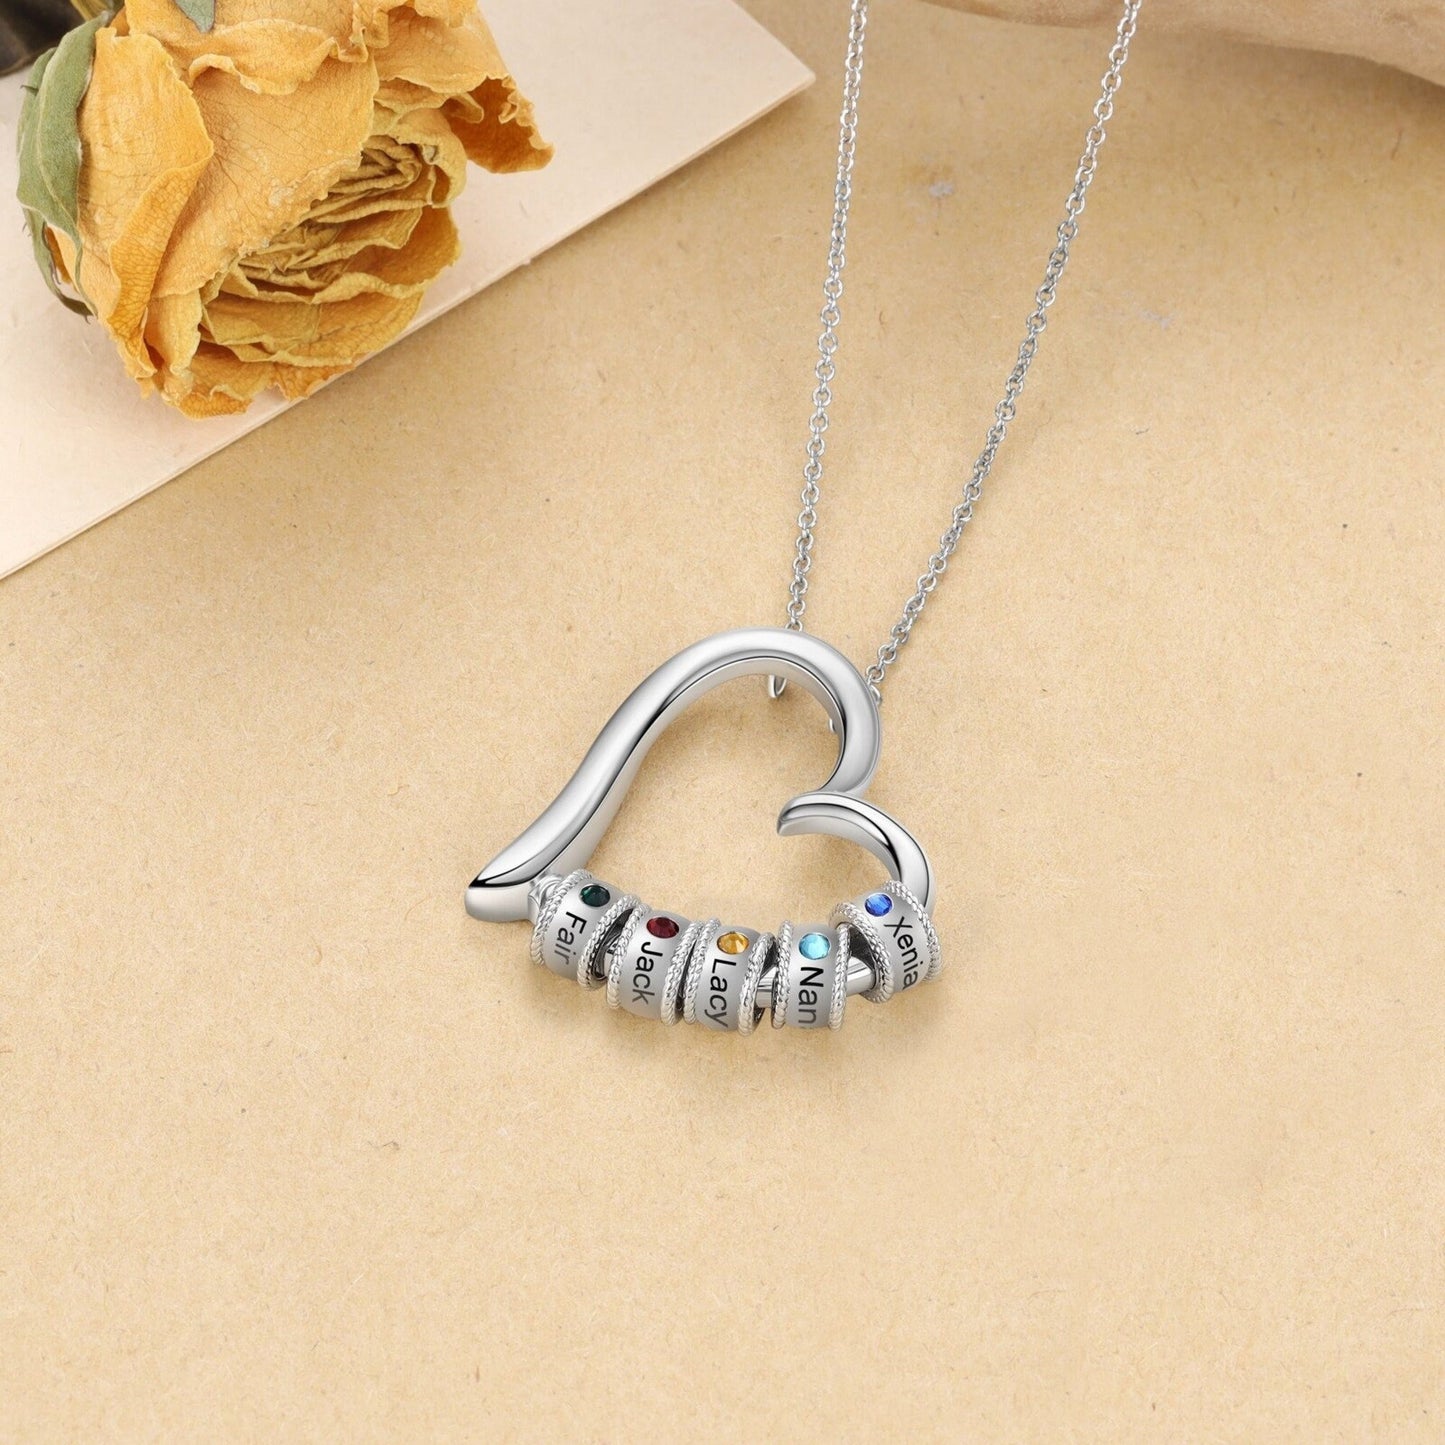 Personalized Family Heart Pendant Necklace